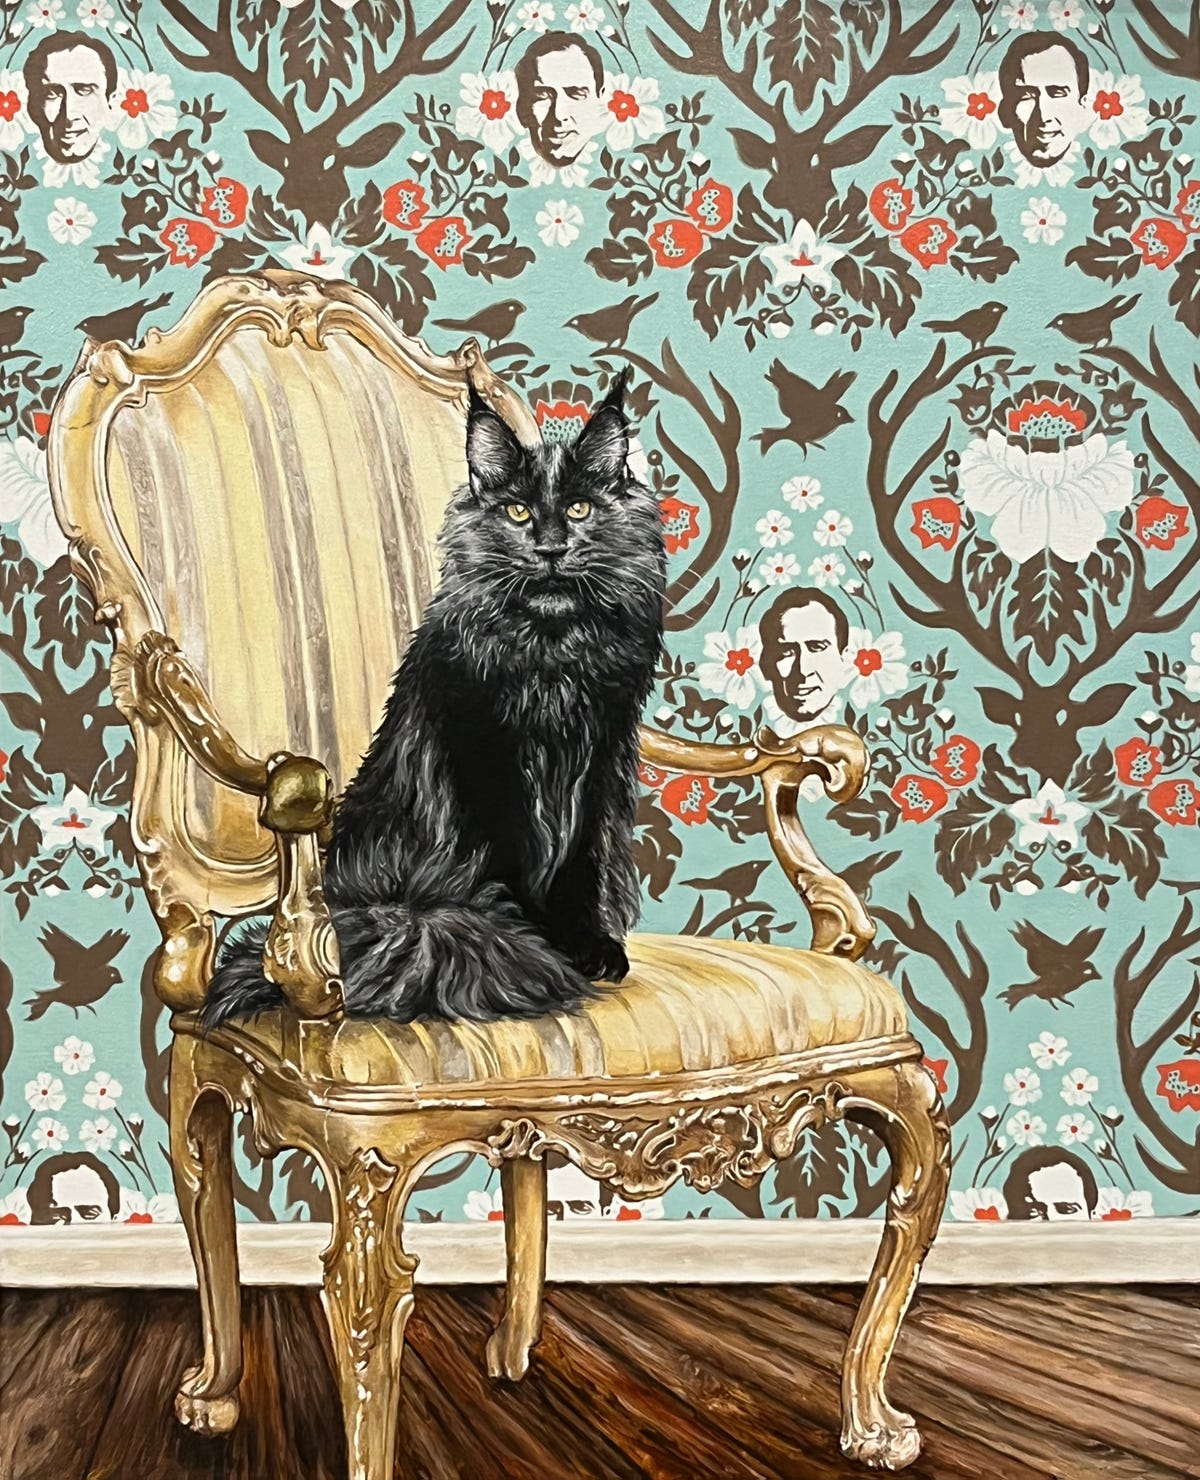 Merlin, an oil on canvas by Michael Caines, depicts Nic Cage's cat sitting on a chair in front of wallpaper with Cage's face on it